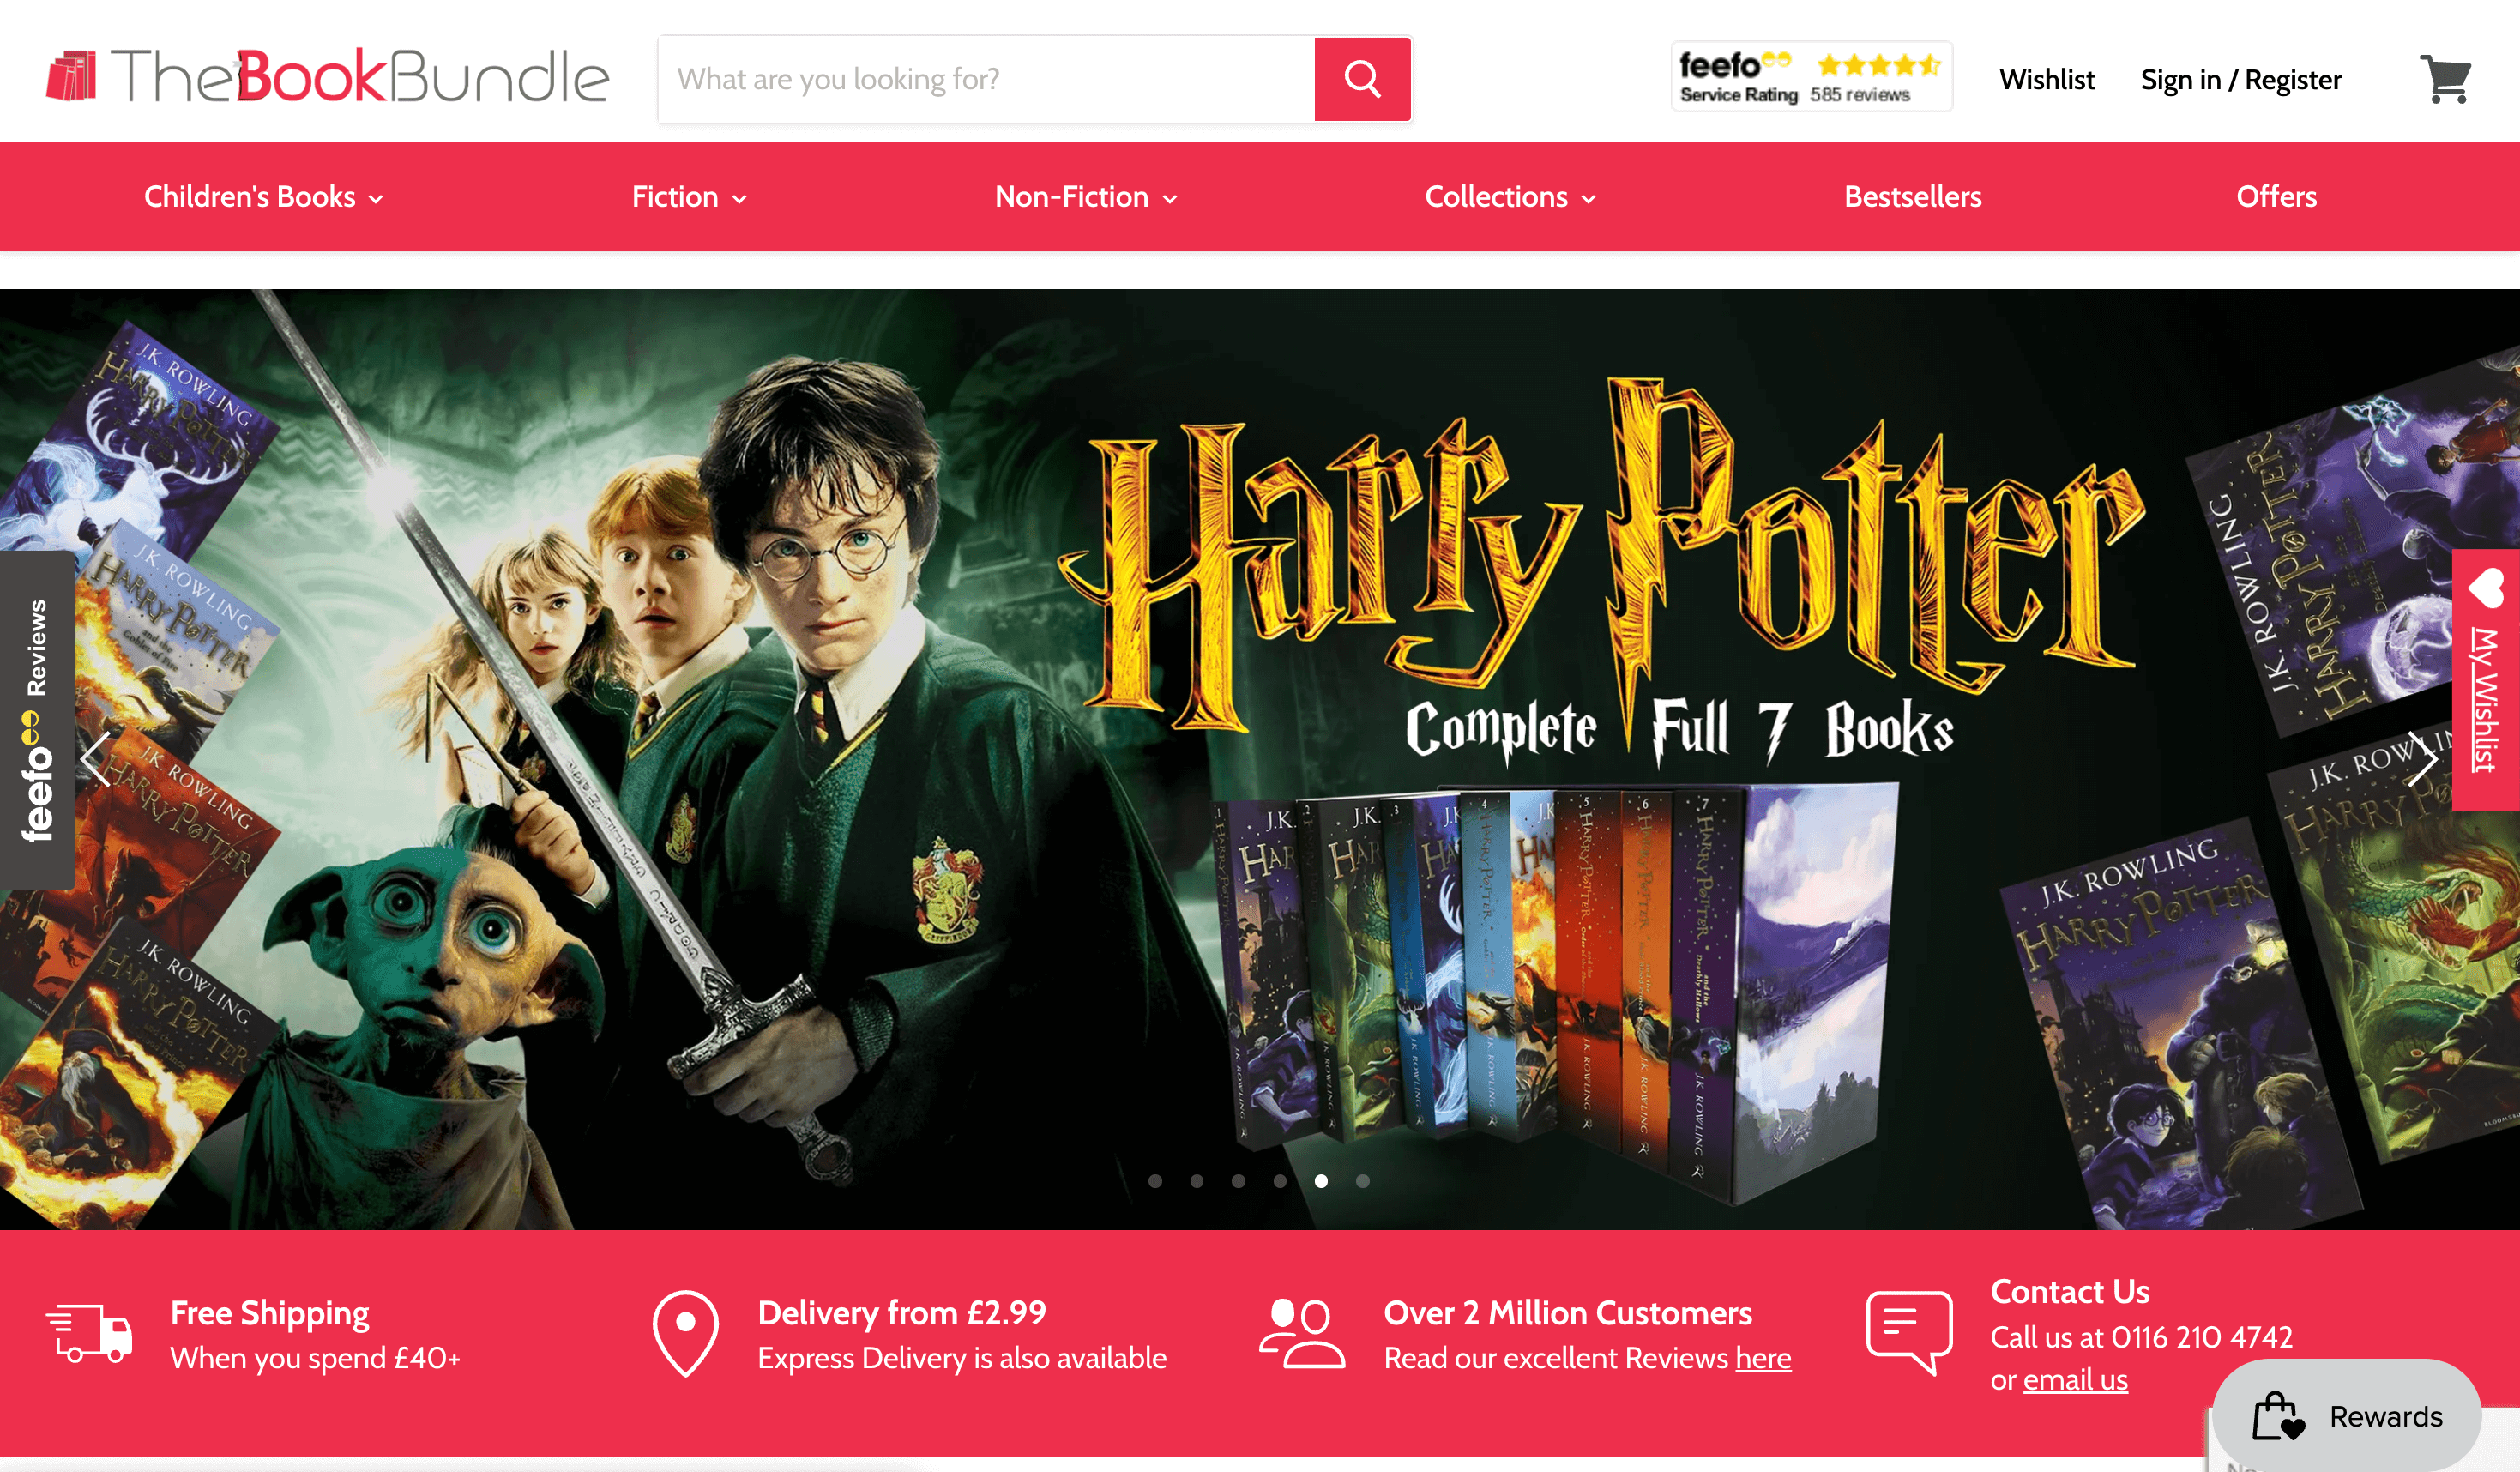 A screenshot from The Book Bundle’s homepage advertising the Harry Potter complete full 7 book bundle. 